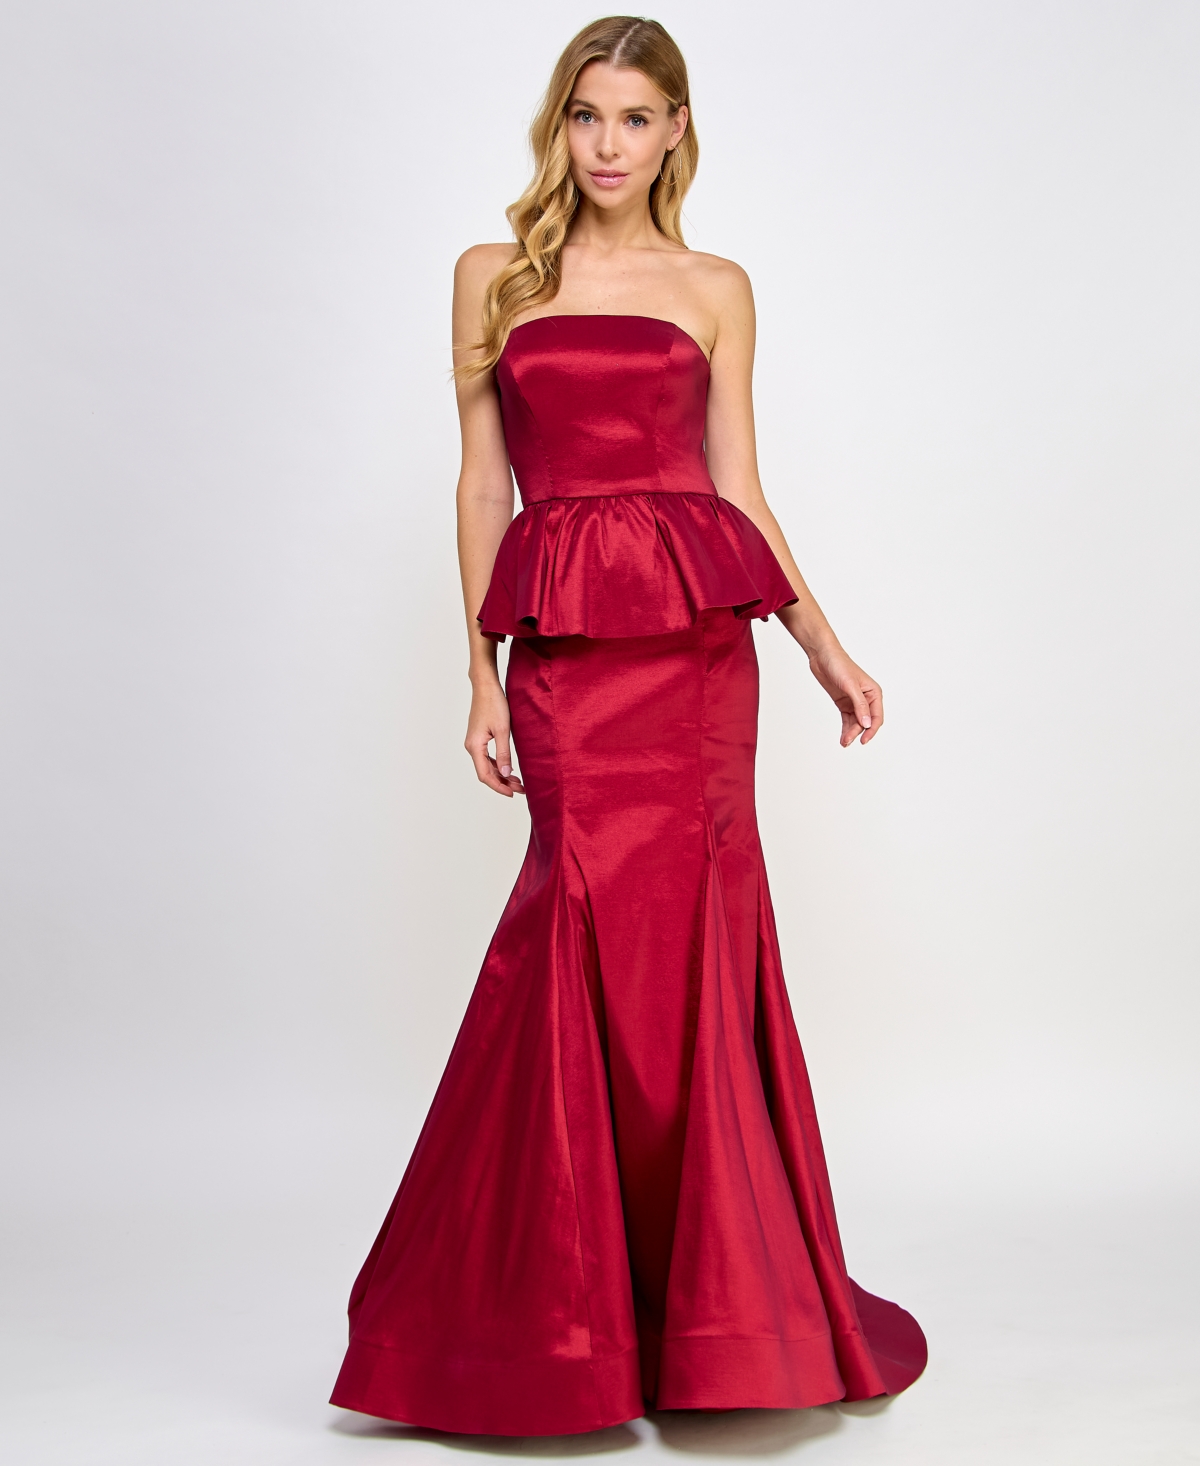 B Darlin Juniors' Peplum Strapless Gown, Created For Macy's In Ruby Red